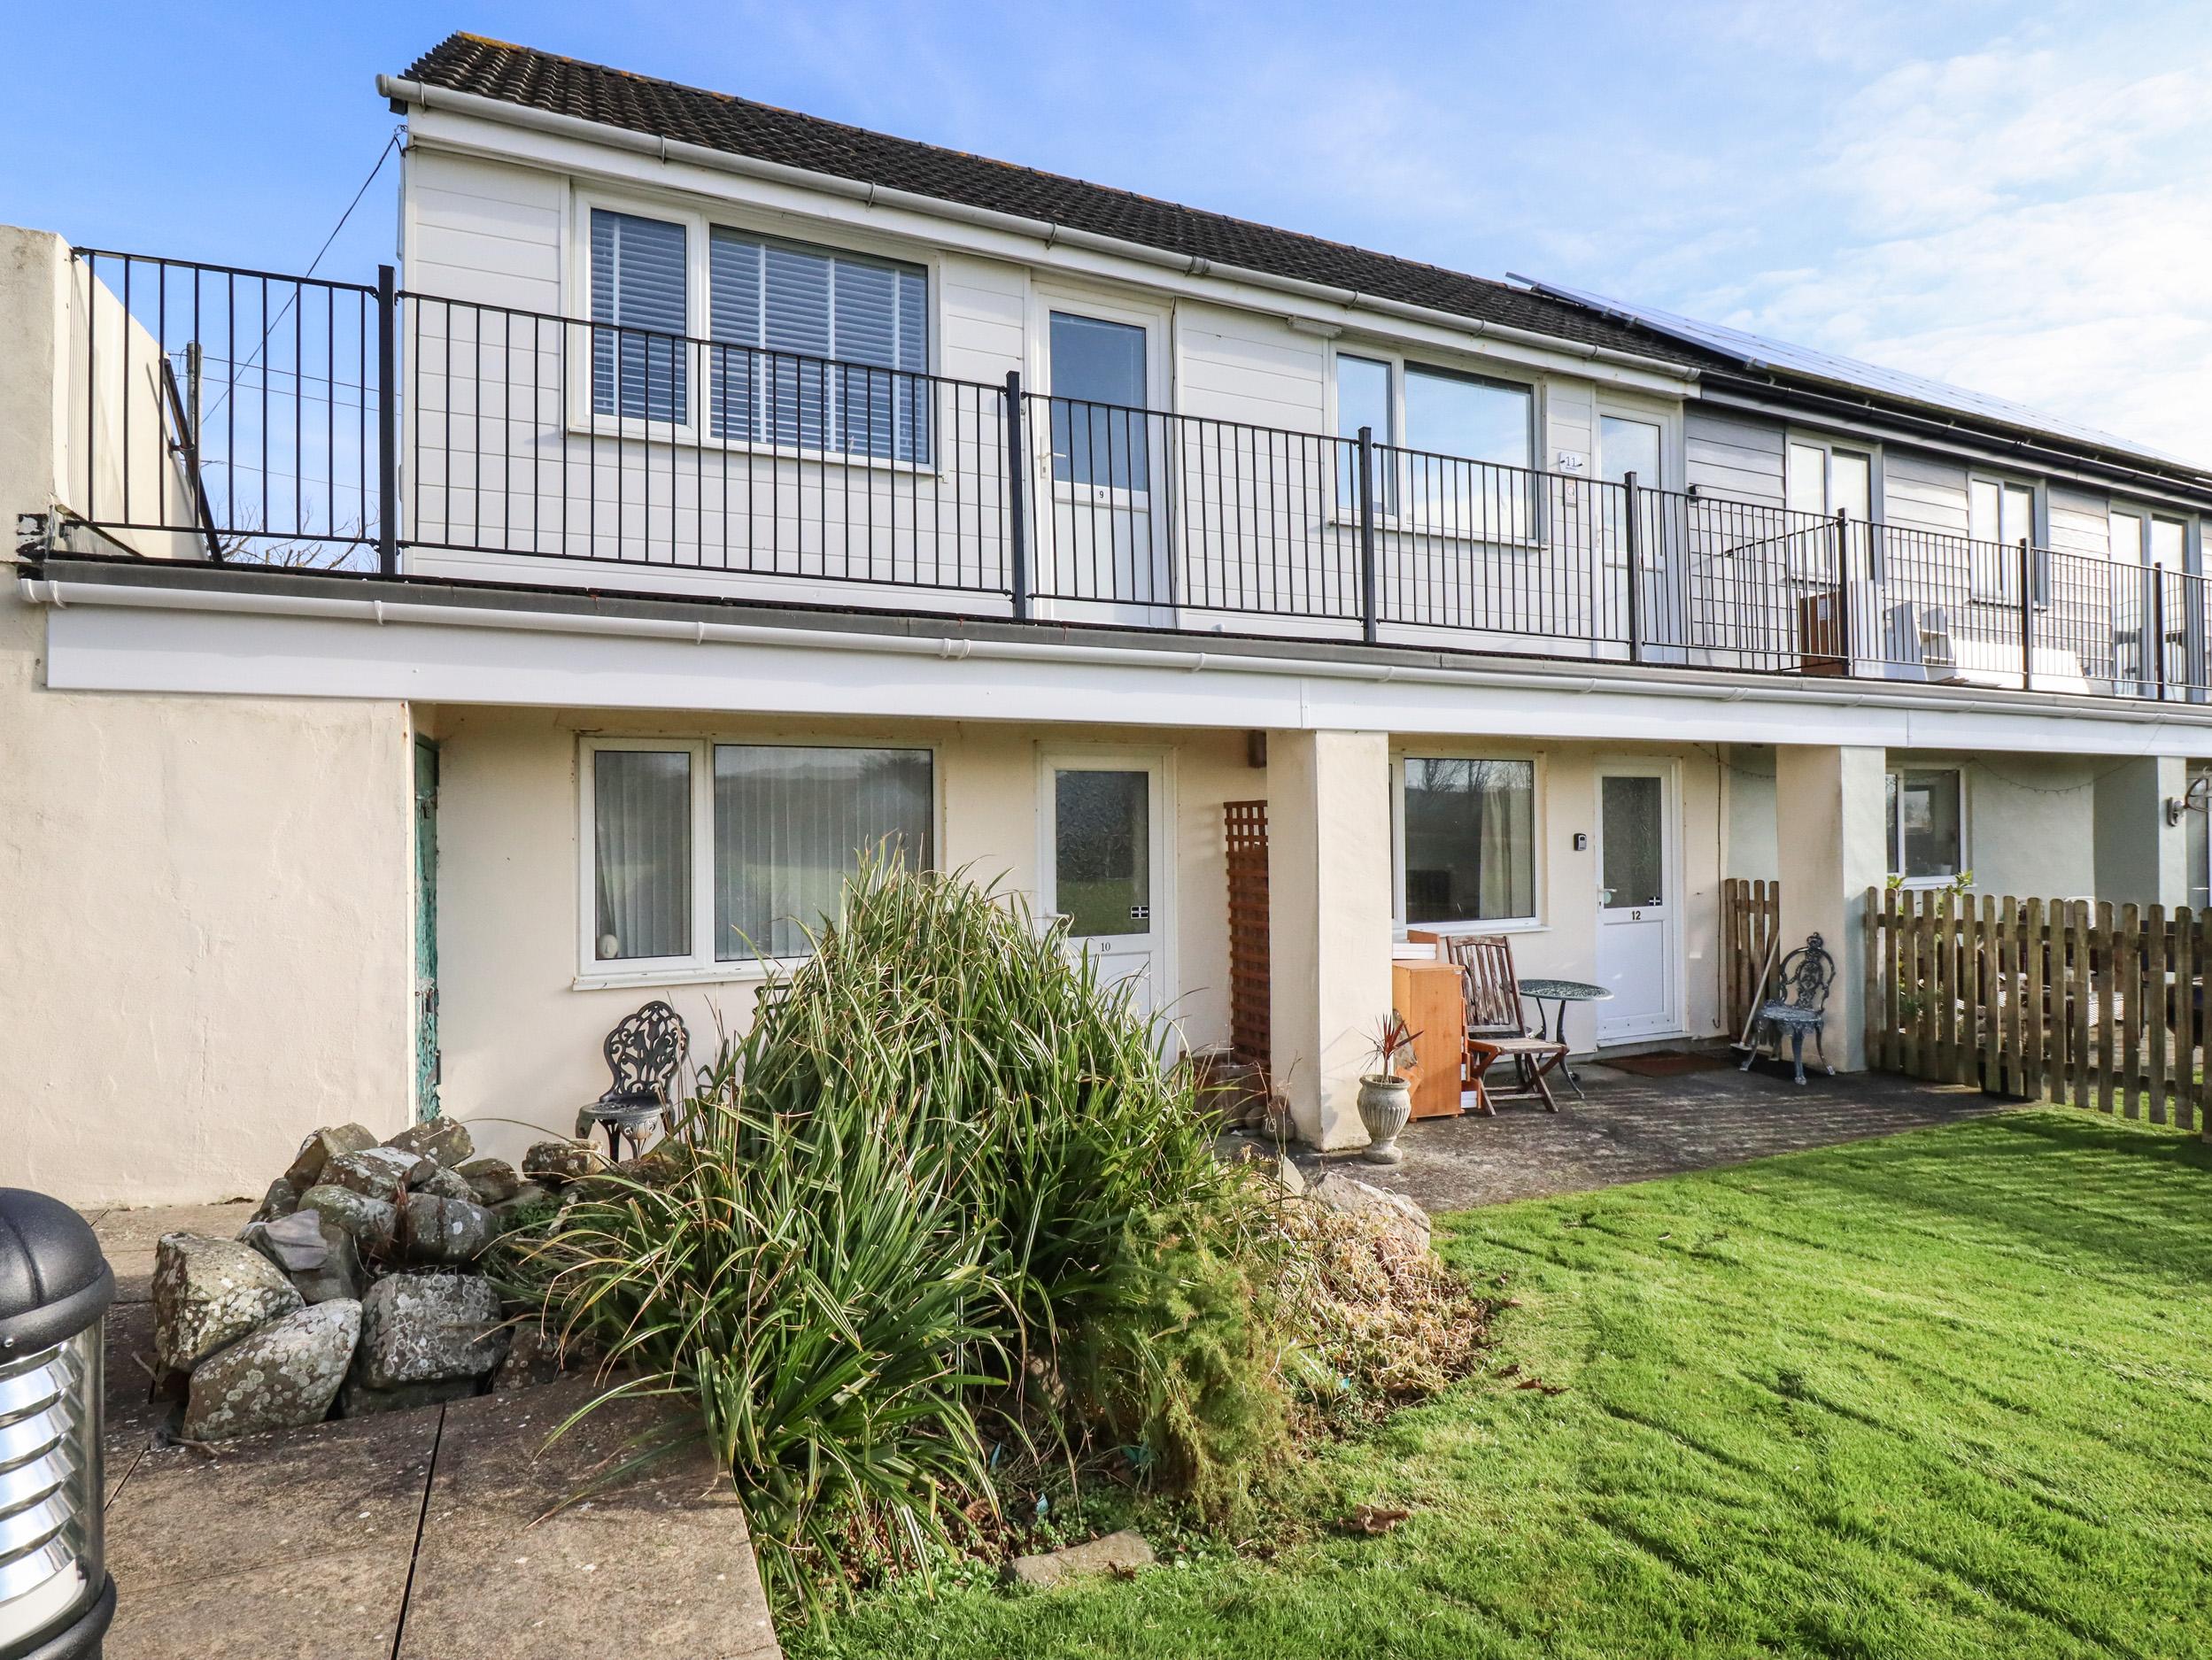 Holiday Cottage Reviews for Apartment 9 - Self Catering Property in Bude, Cornwall Inc Scilly